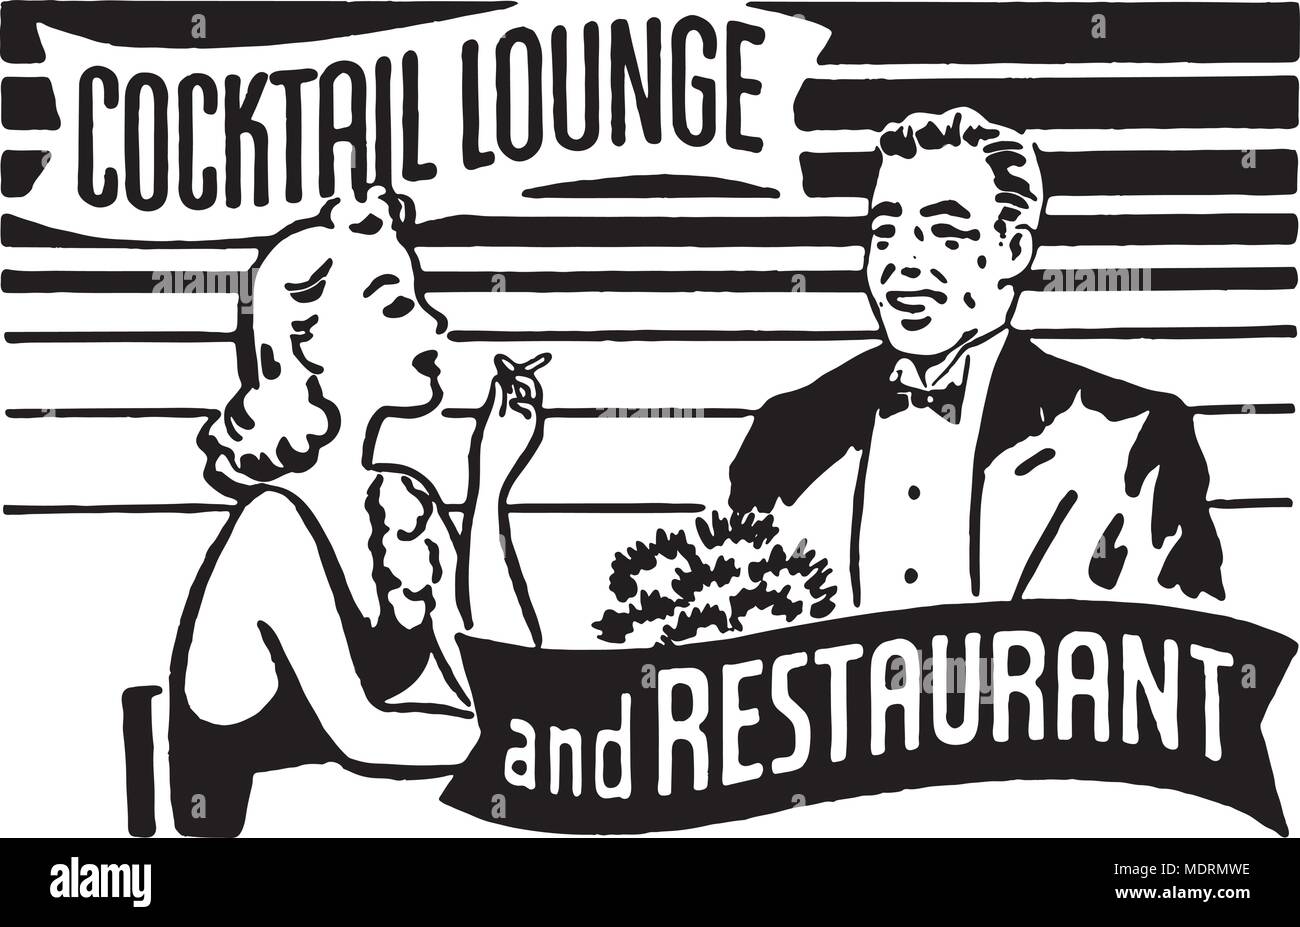 Cocktail Lounge And Restaurant - Retro Ad Art Banner Stock Vector